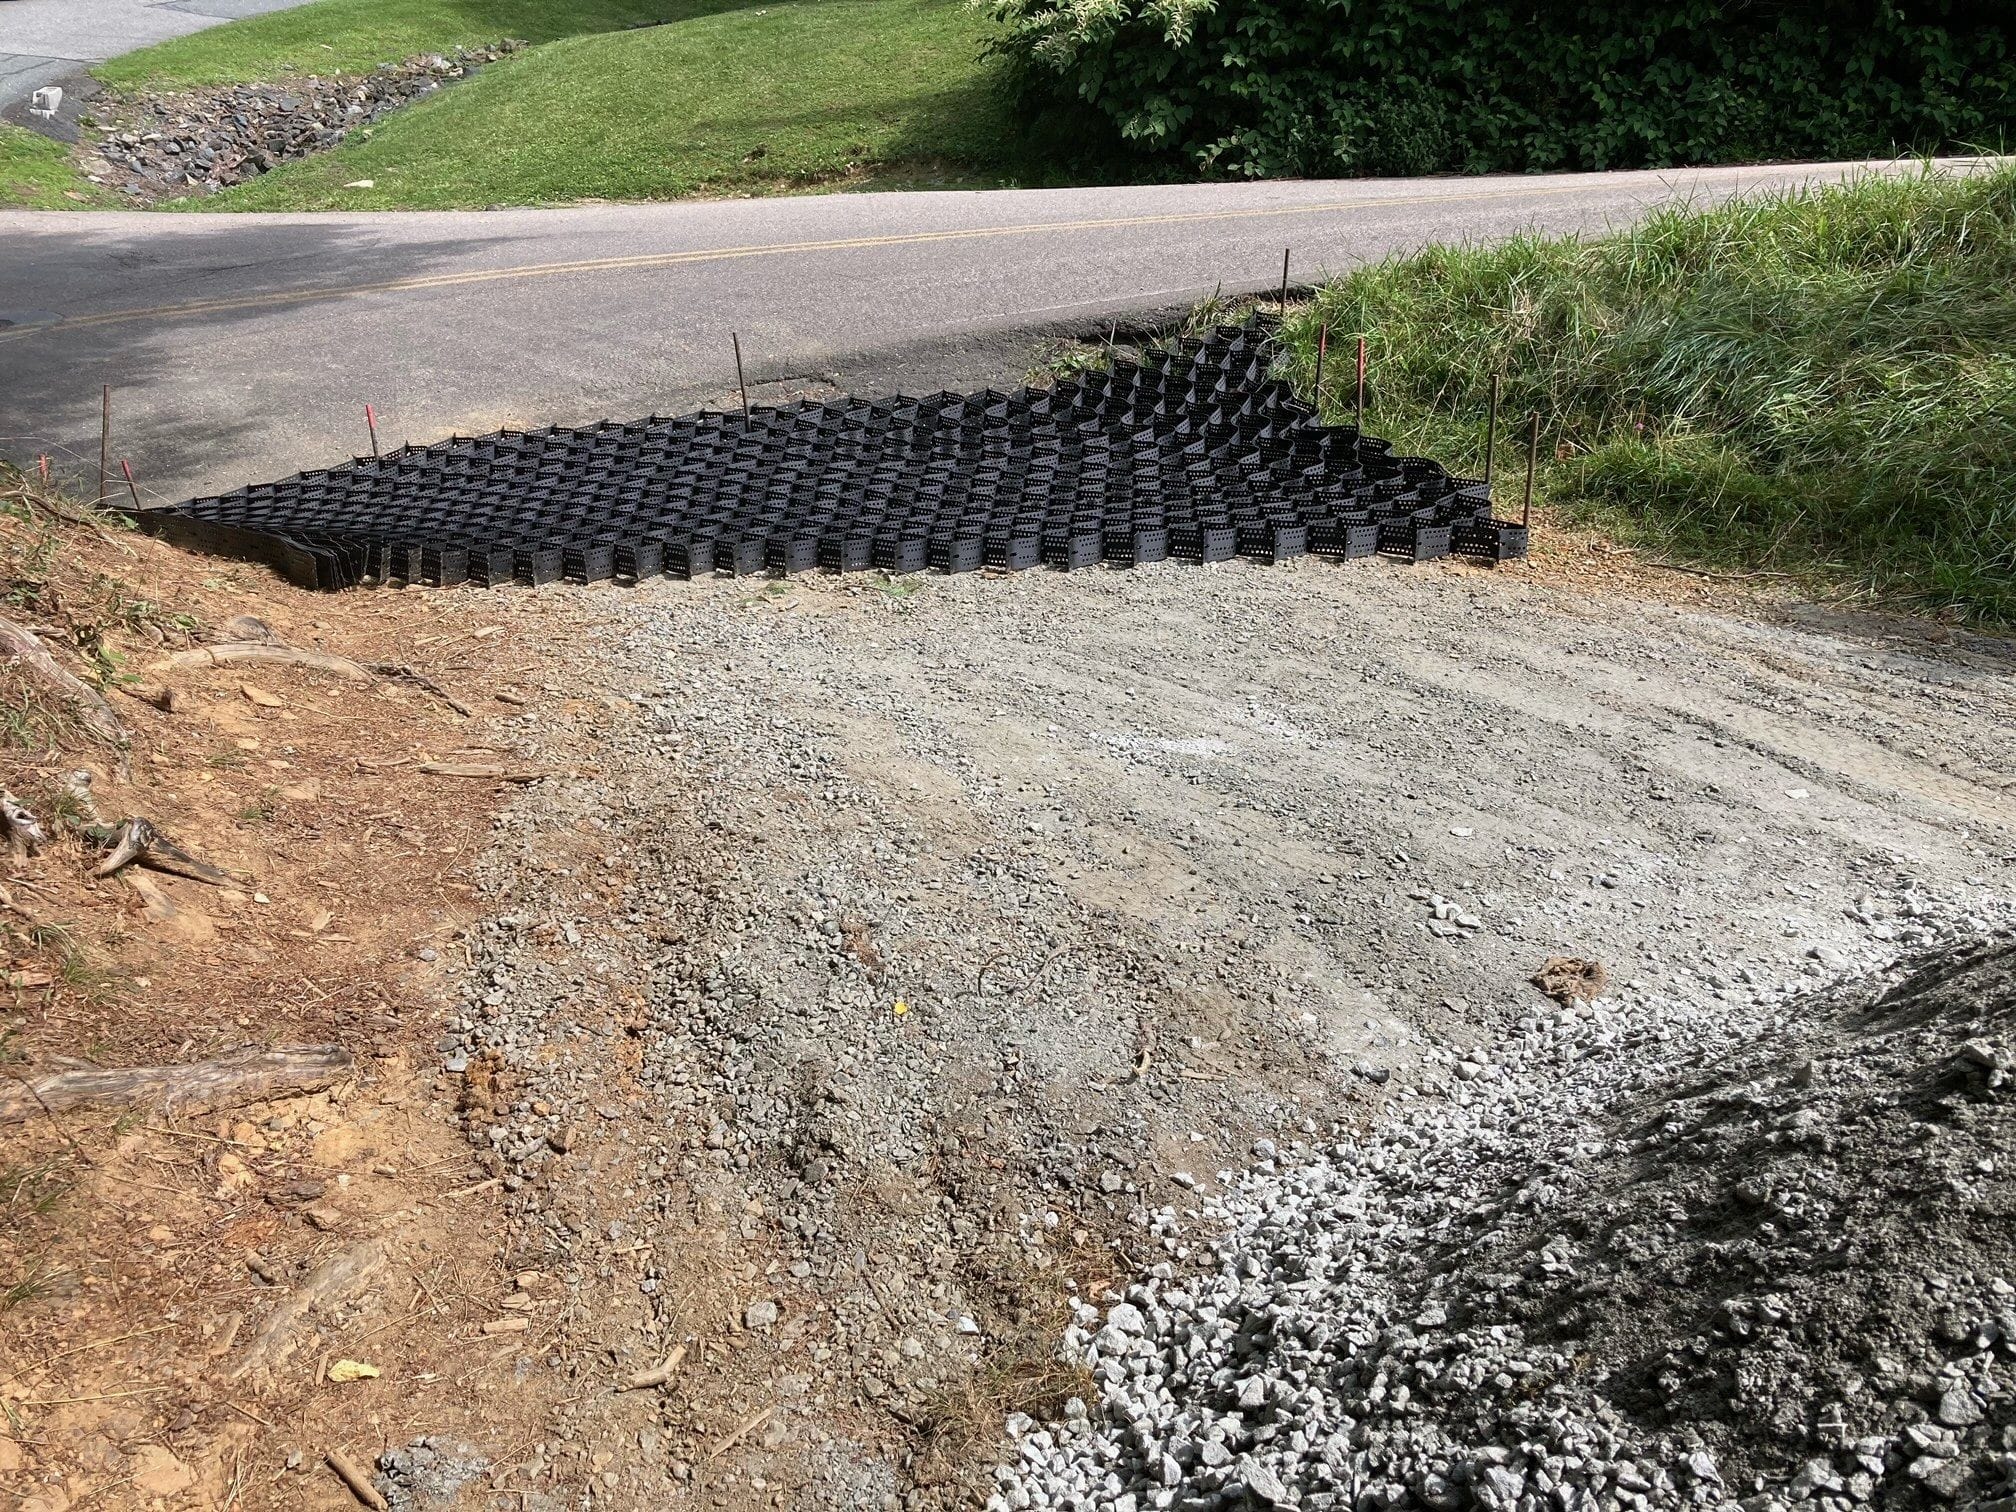 A Geo stabilization grid is used to reduce washing of gravel and erosion from pavement runoff